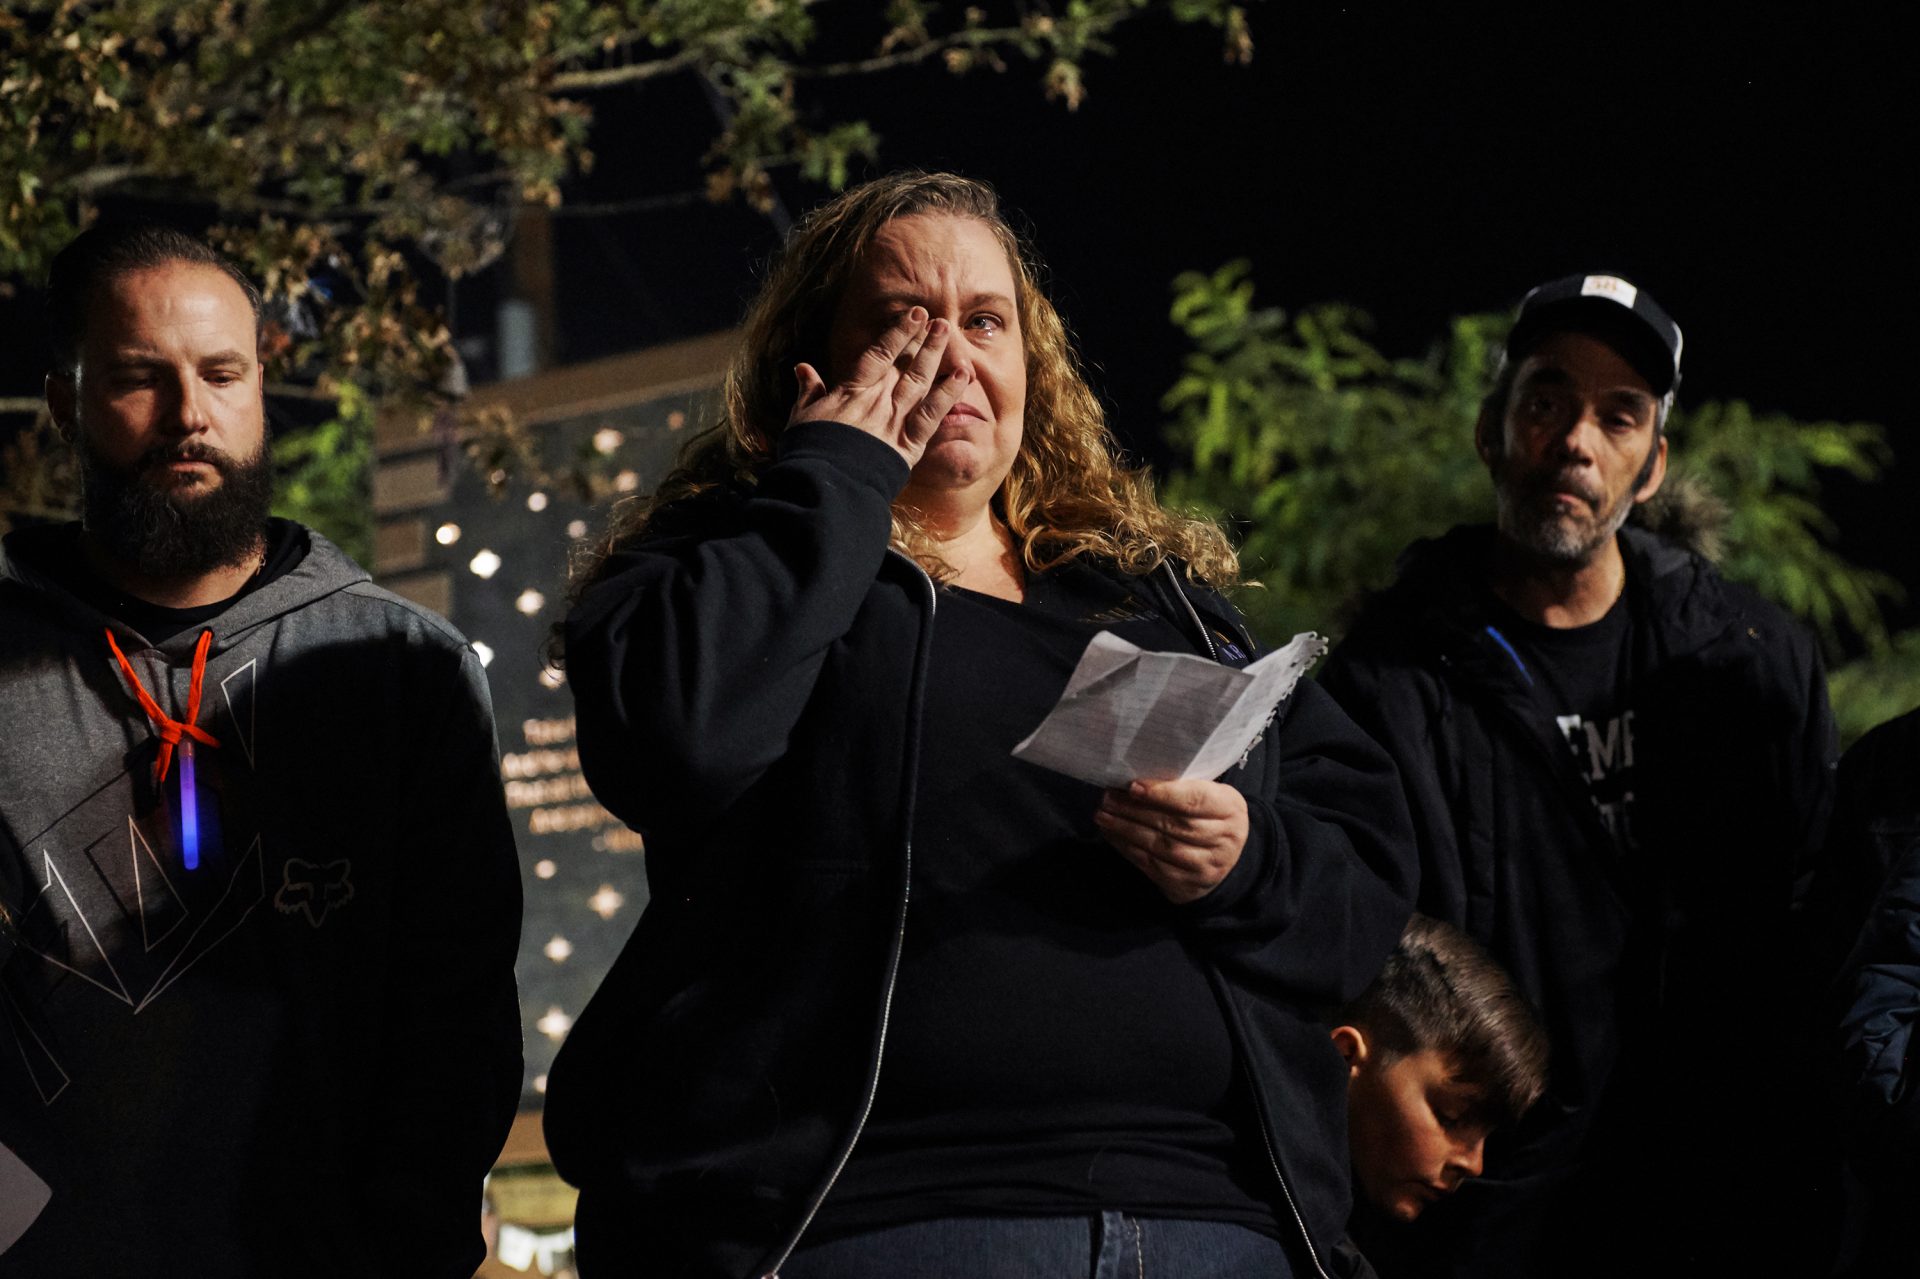 At the Healing Garden in Las Vegas on Nov. 9, 2018, Las Vegas shooting survivor Stacie Armentrout reads the names of victims from the Thousand Oaks, Calif., shooting. One of the people killed in Thousand Oaks was a Route 91 survivor, a friend Armentrout met through the Route 91 community.